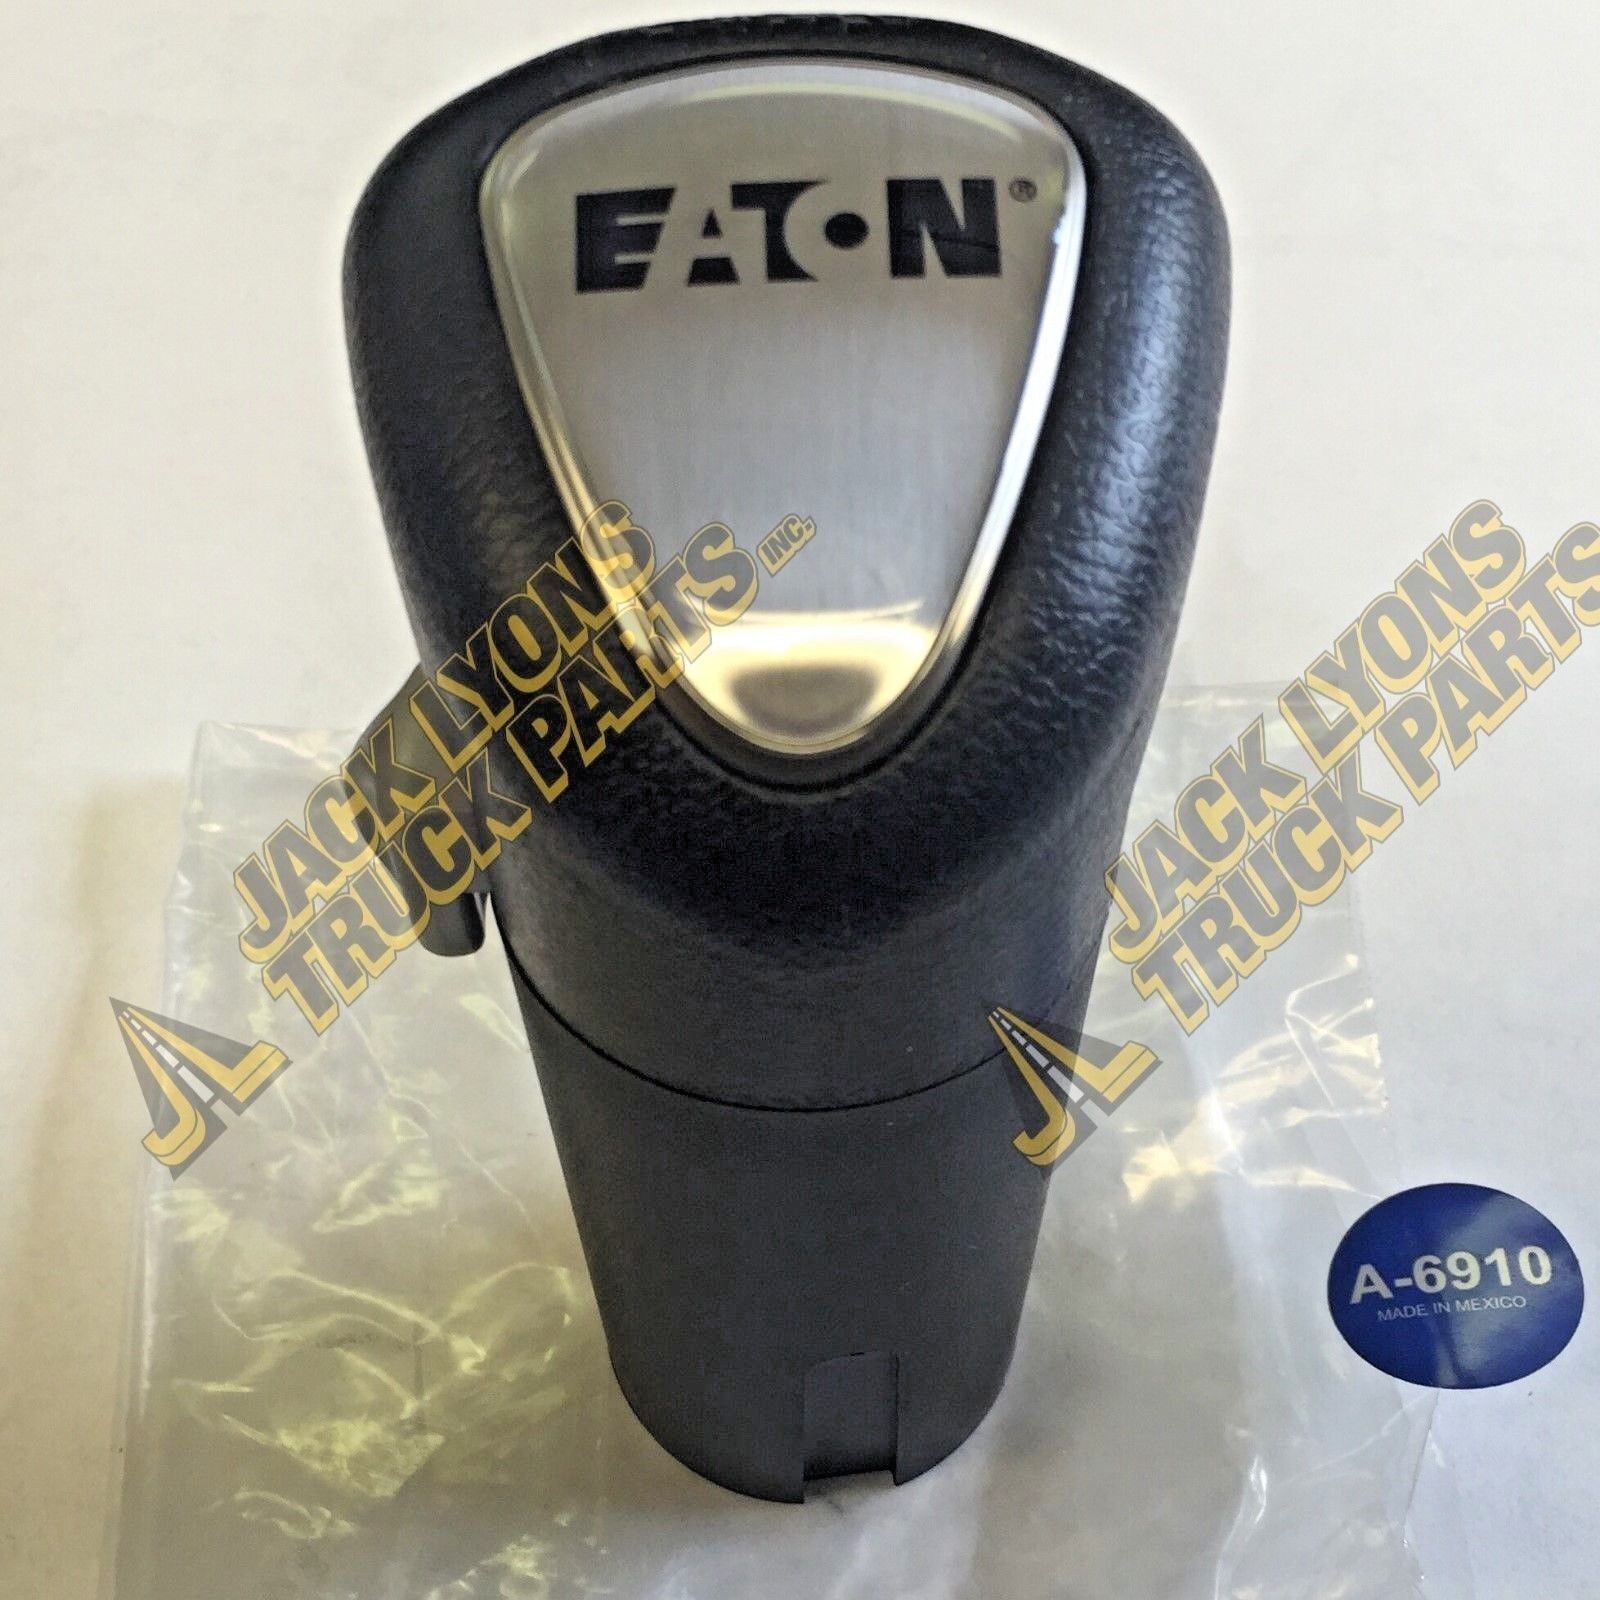 A6910 New Genuine Eaton Fuller Super 10 Speed Shift Knob OEM A-6910 old# A-5510